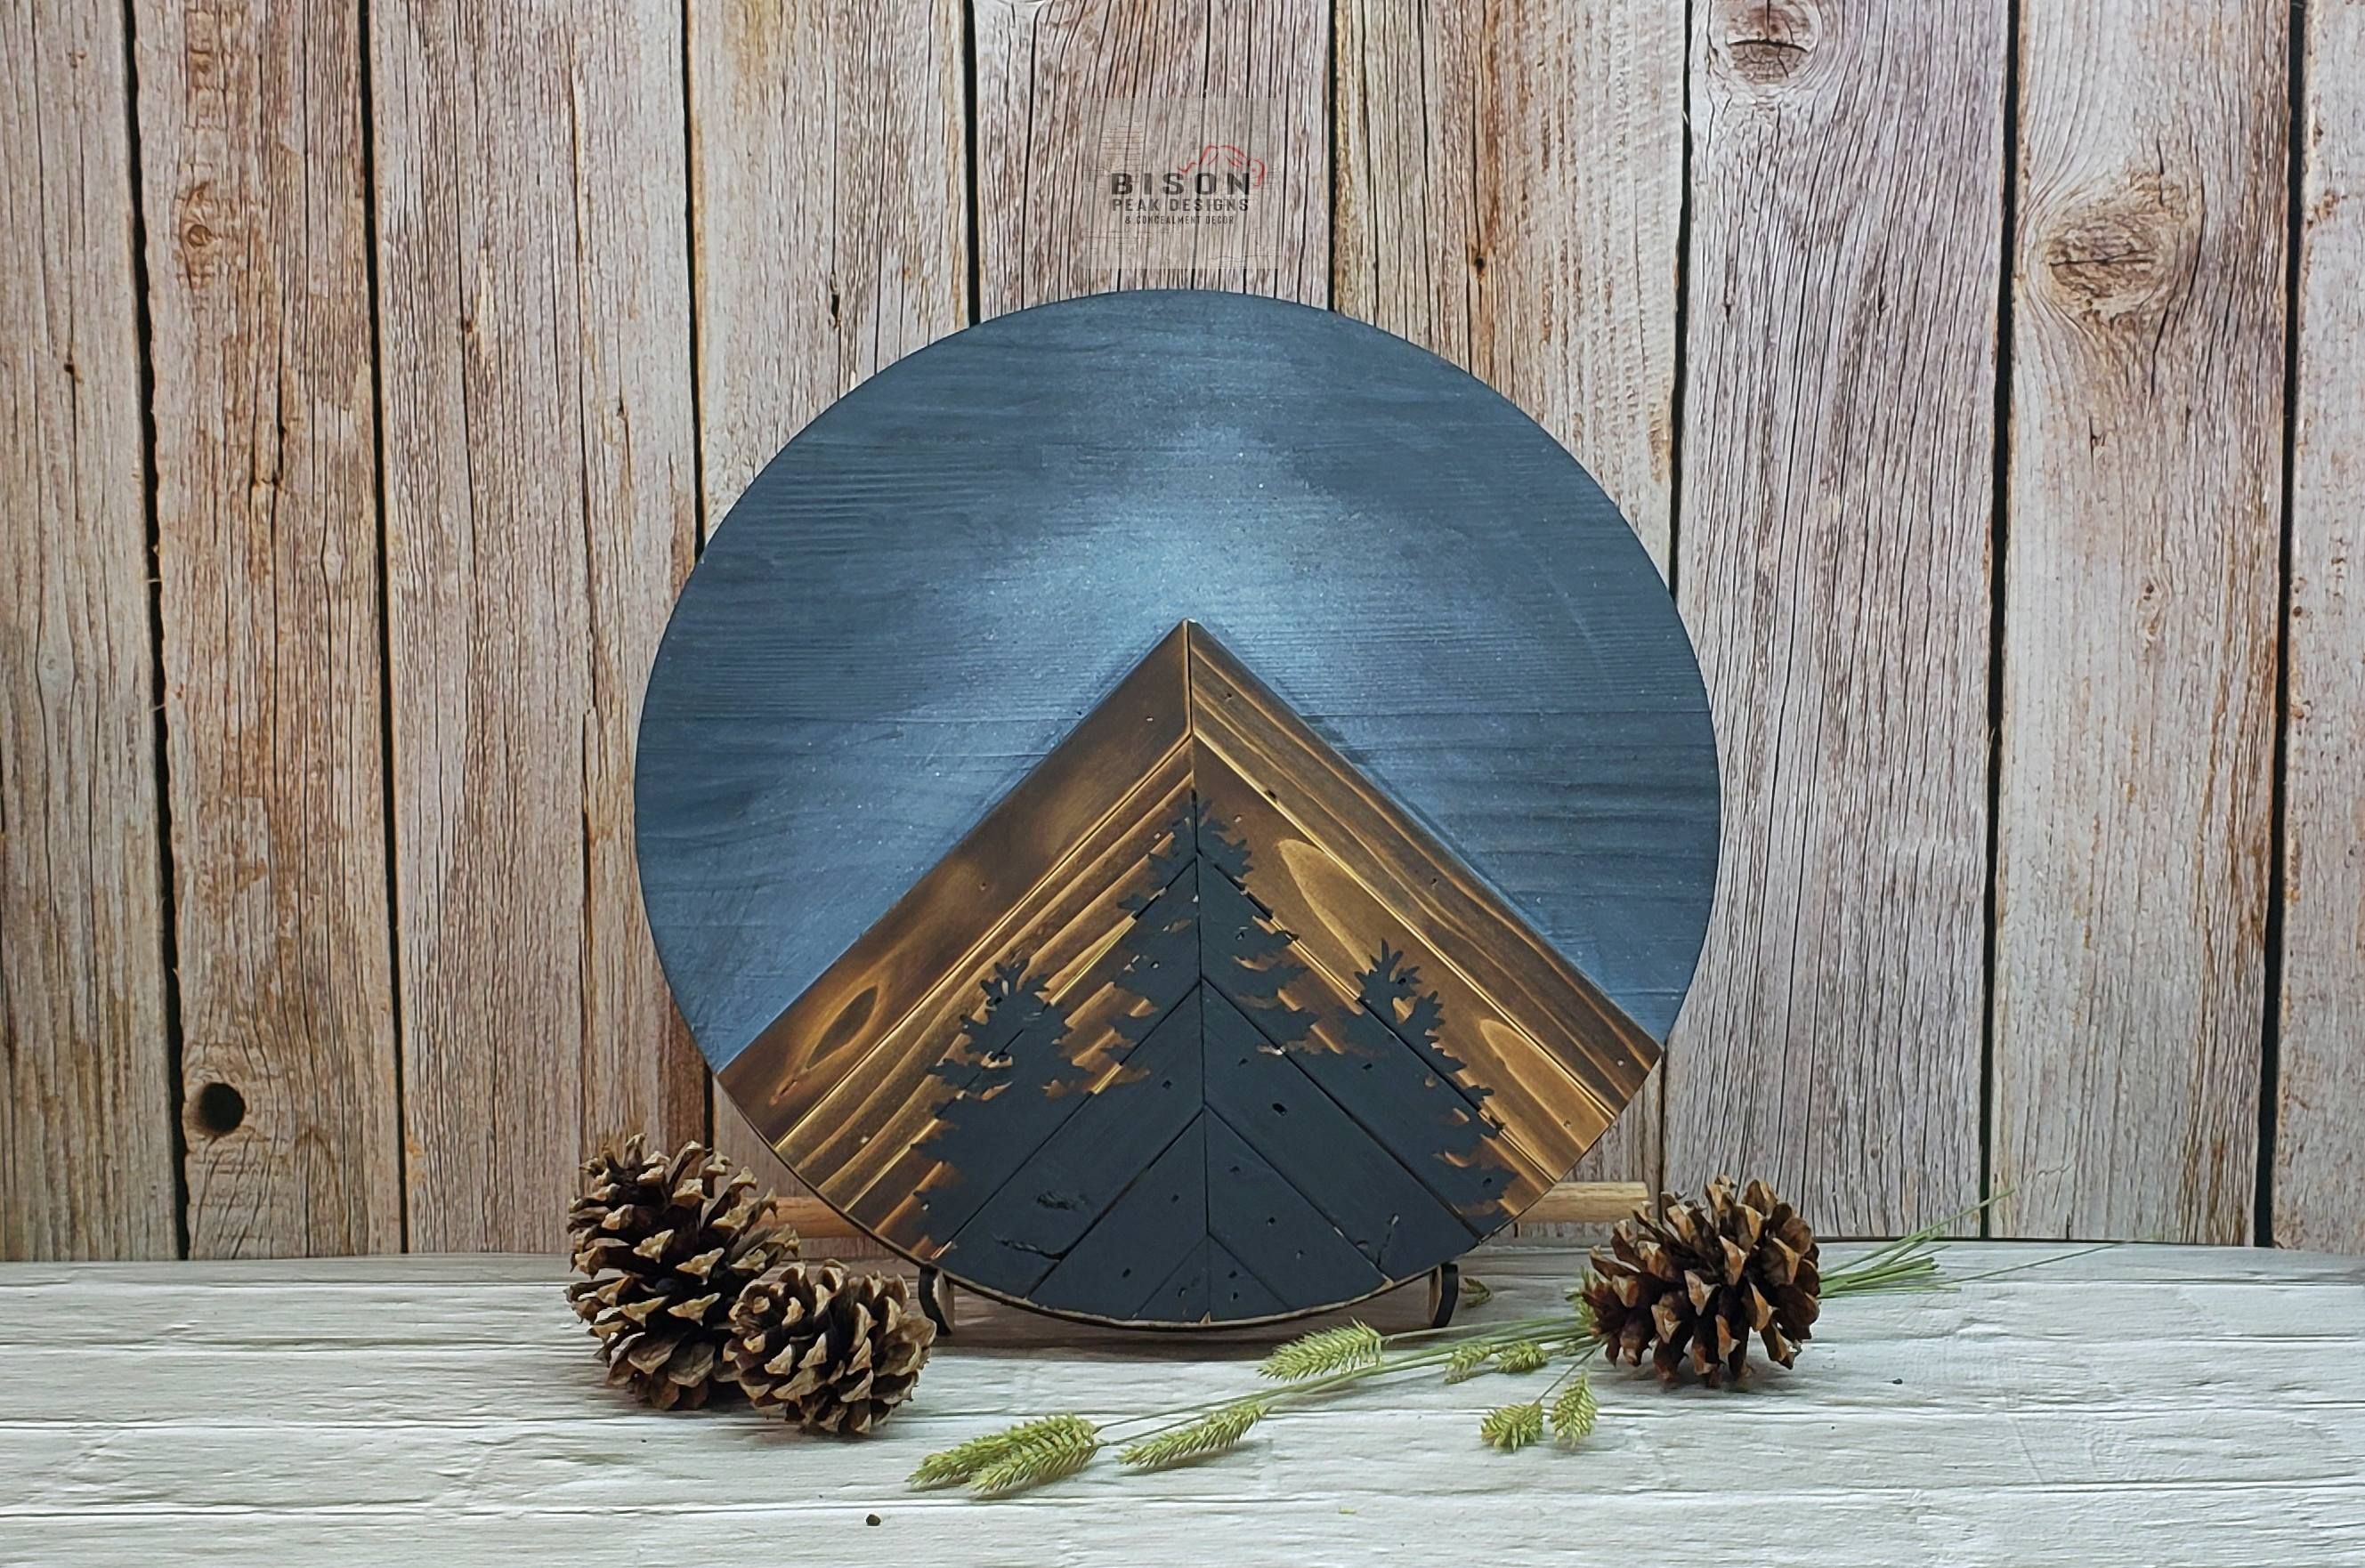 Buy Custom Made 12in Round Rustic Mountain Wall Art. Wall Hanging Decor For  The Home. Handmade Gifts., made to order from Bison Peak Designs